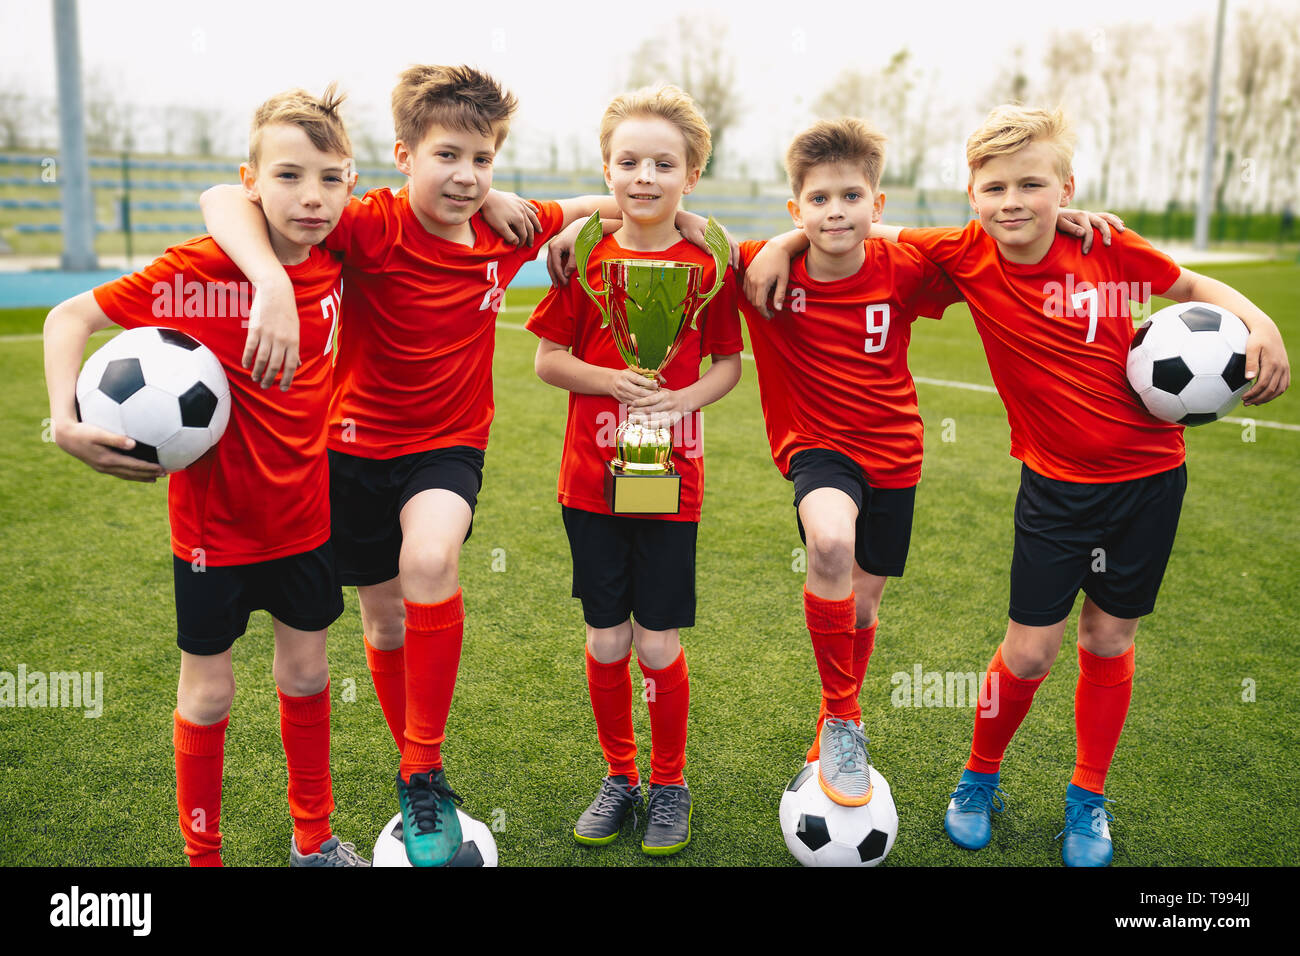 Happy Young Boys In Football Team. Kids in School Soccer Sports Team Holding Golden Trophy and Soccer Balls. Group Of Children In Soccer Team Having F Stock Photo